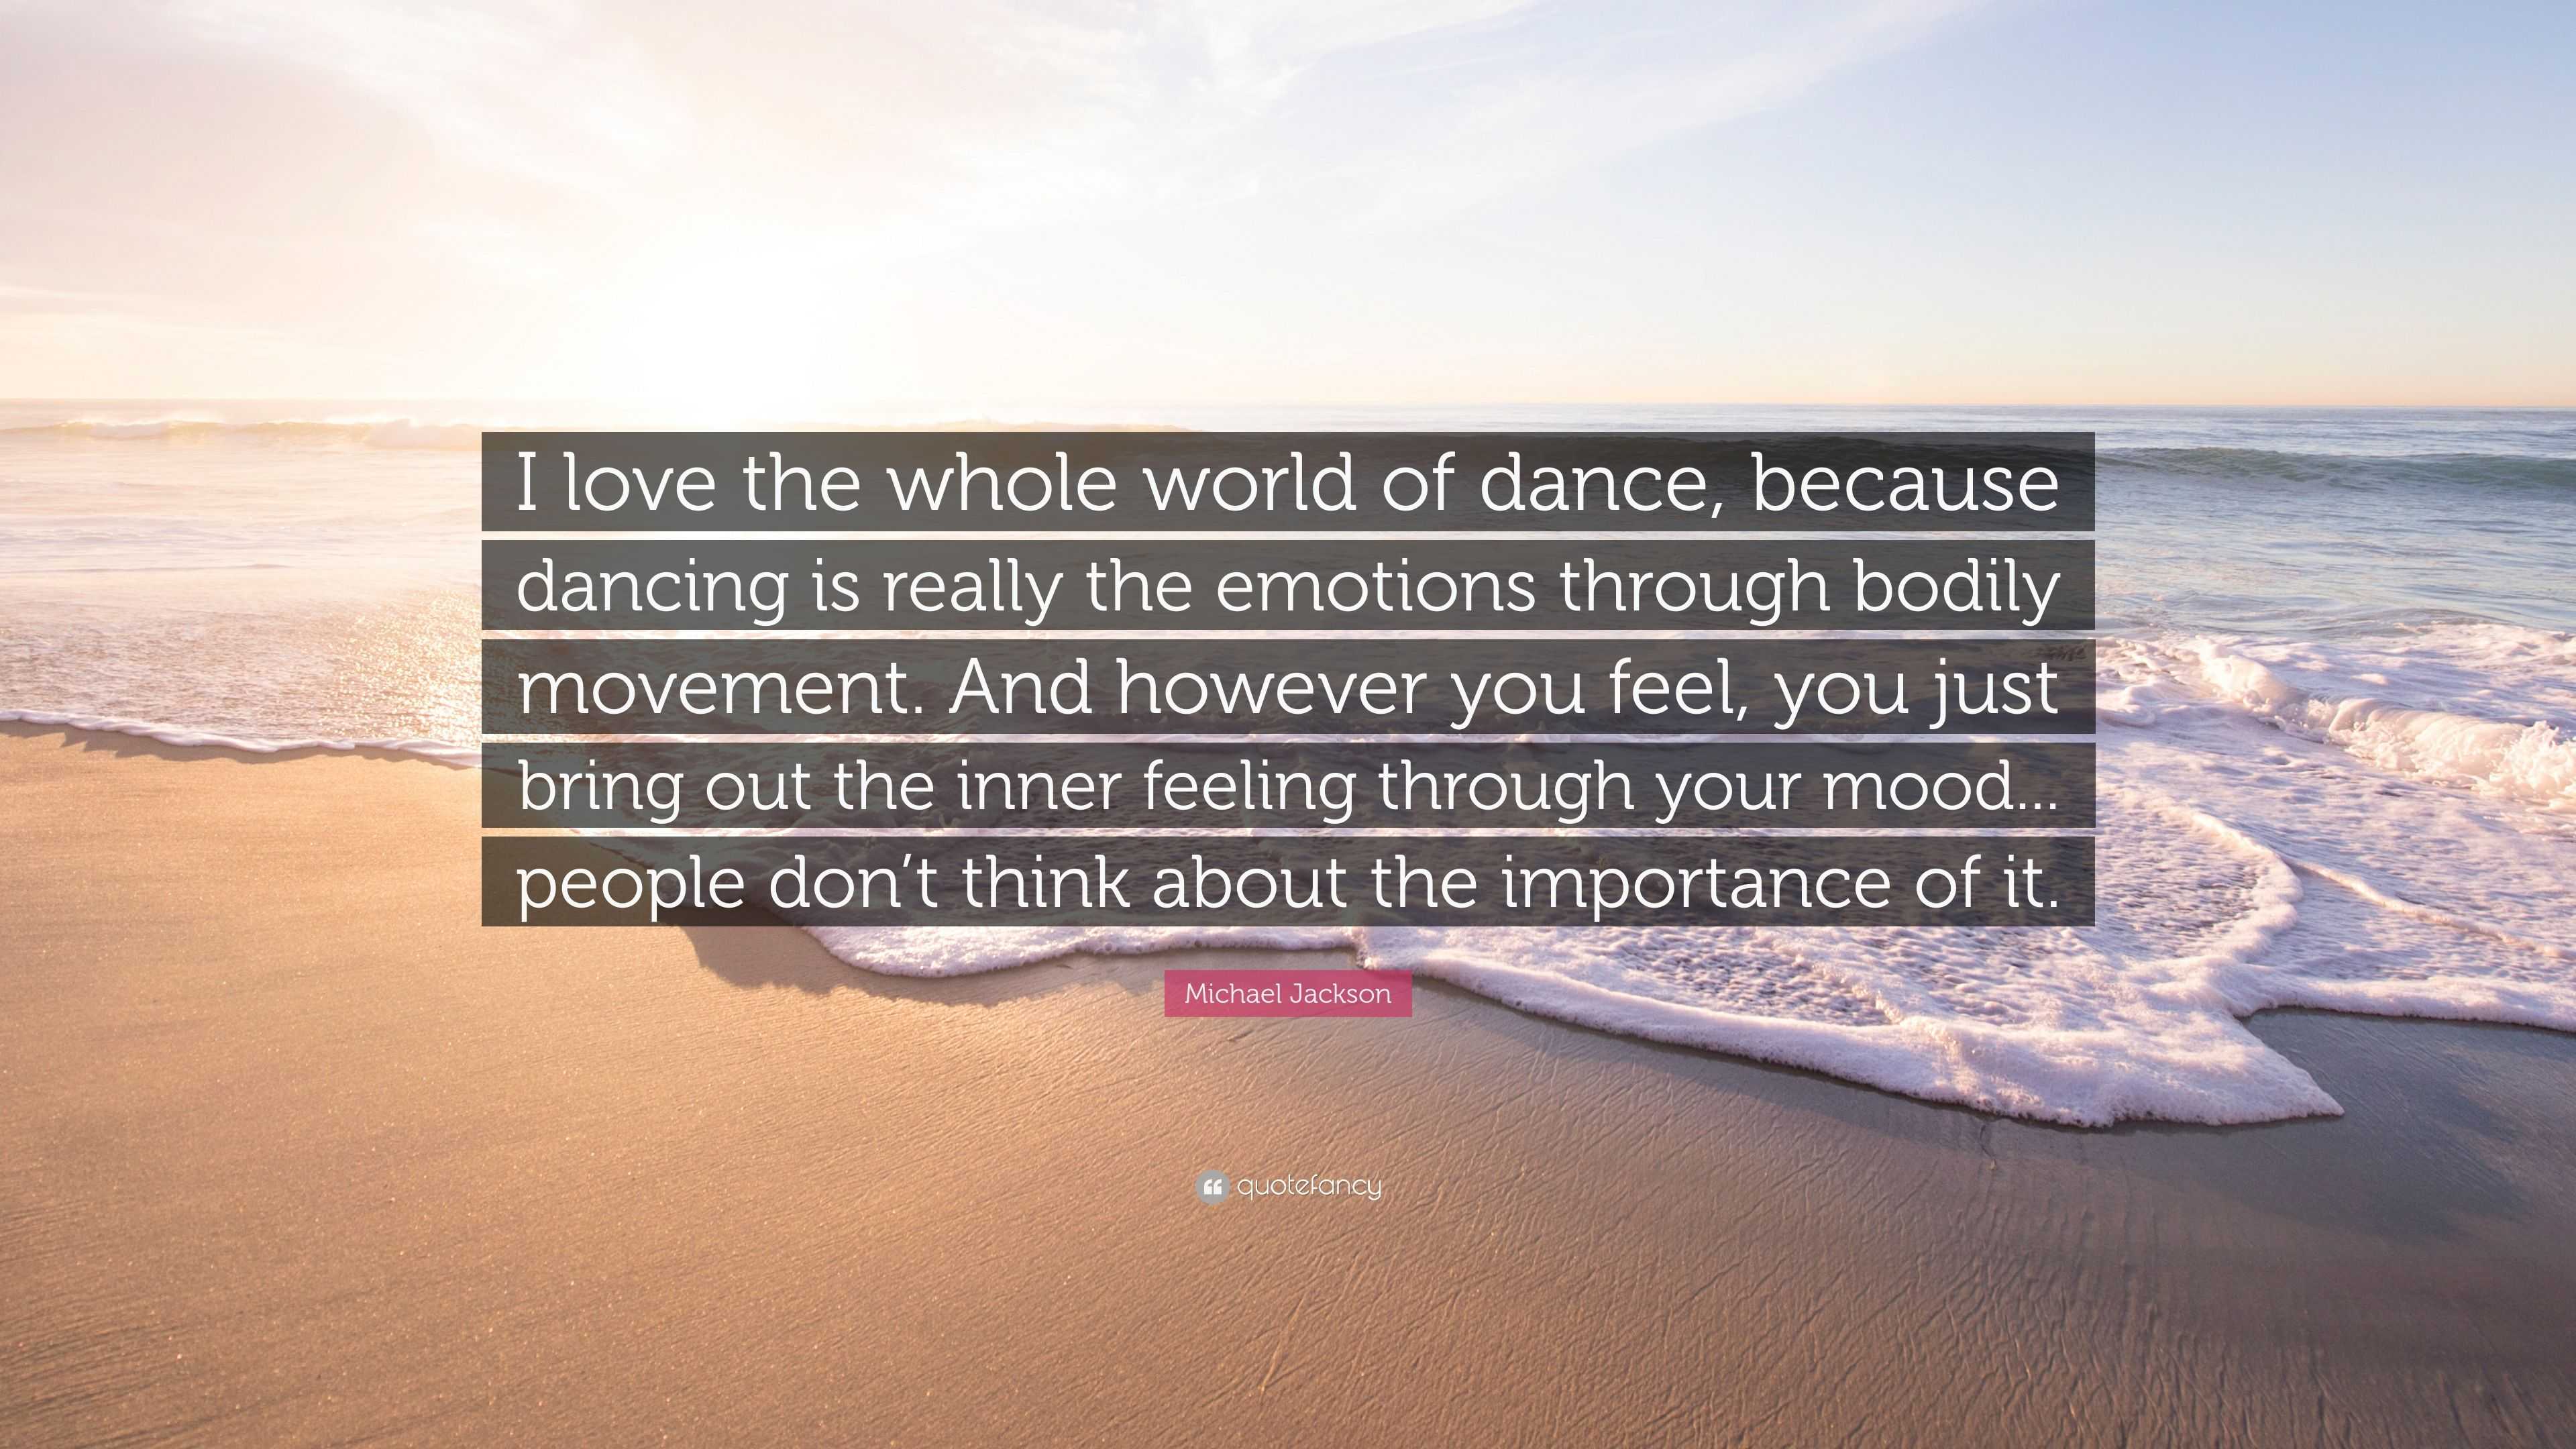 Michael Jackson Quote: “I love the whole world of dance, because